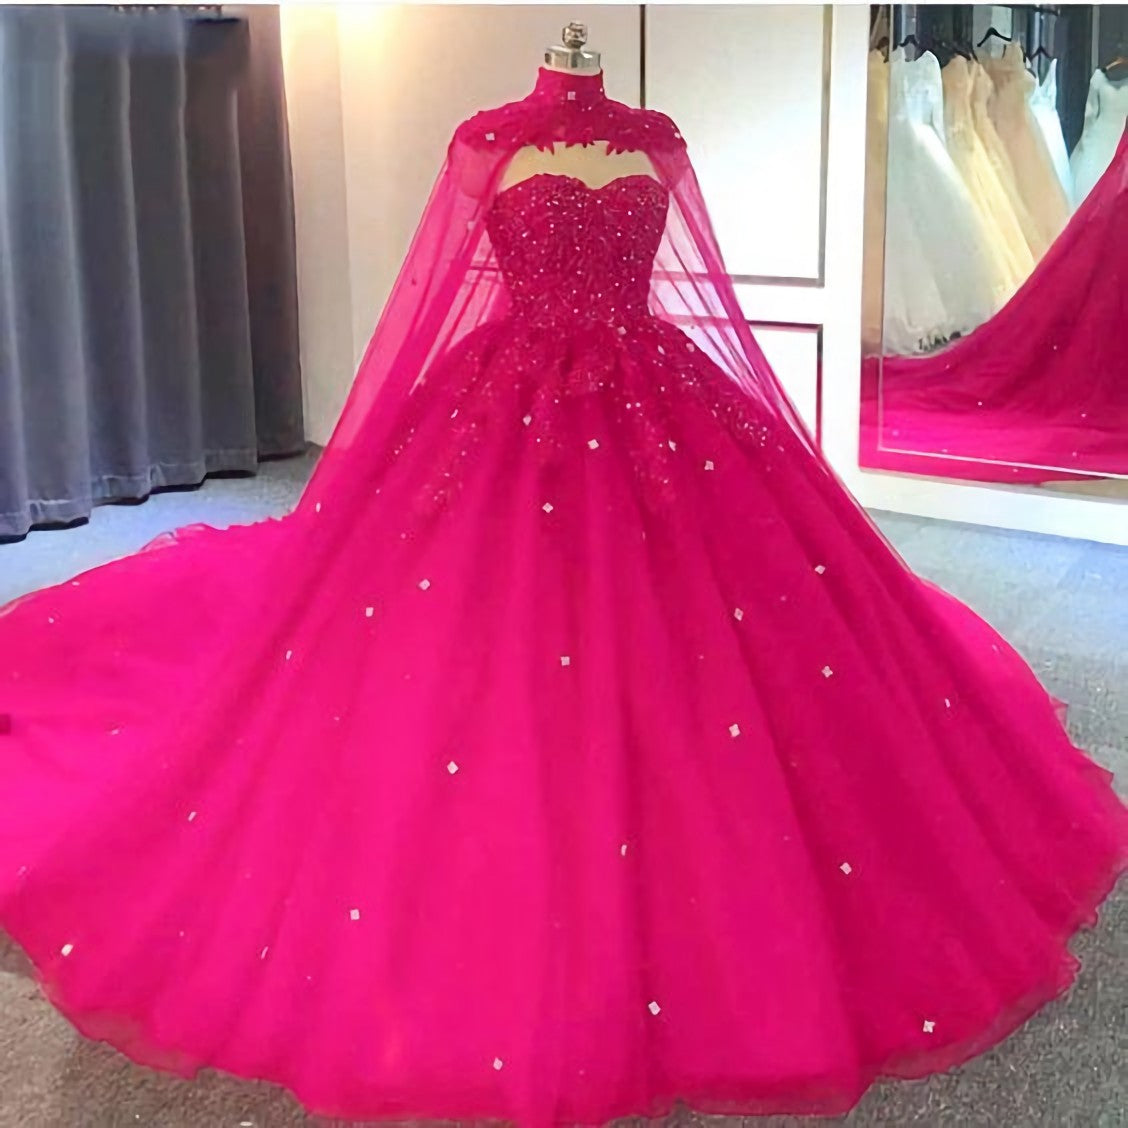 Homecoming Dress Inspo, Hot Pink Detachable Cape Quinceanera Sweet 16 Ball Gown Prom Dress